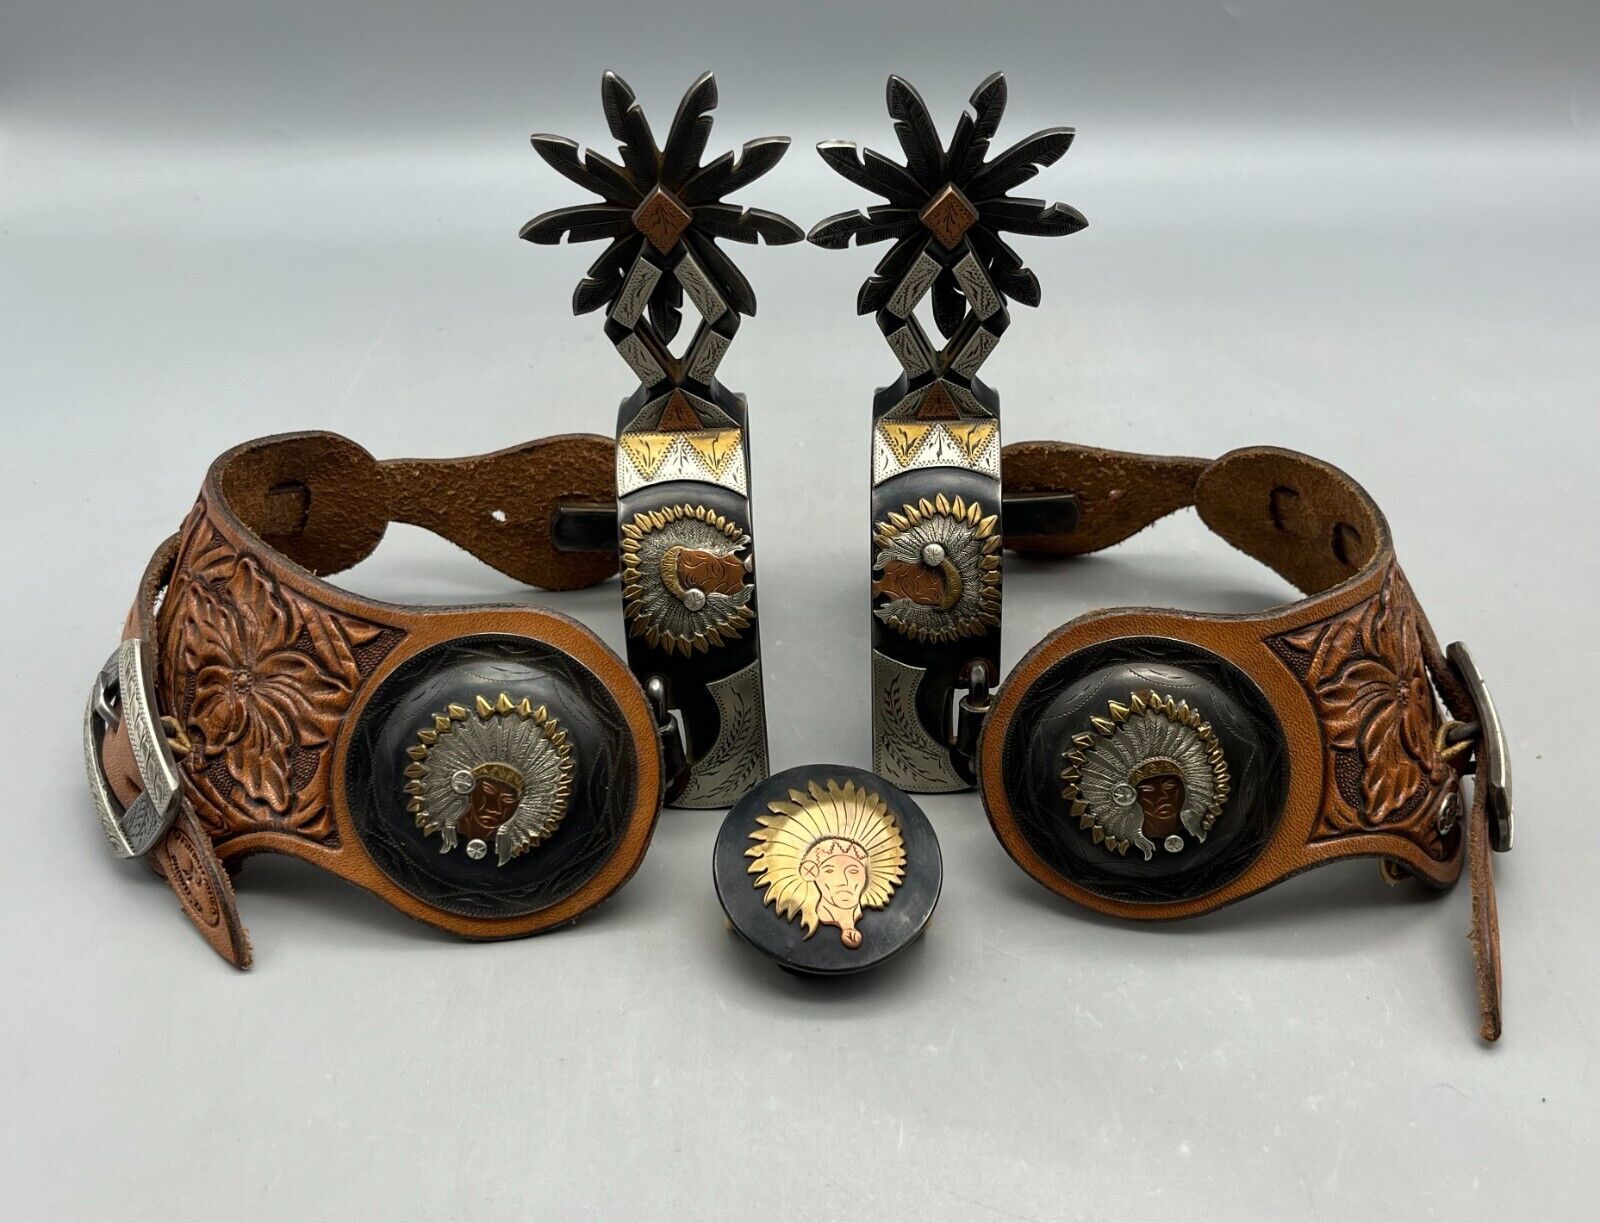 Fancy Spurs, Conchos, Buckles And Bridle Buckle By Clint Mortenson